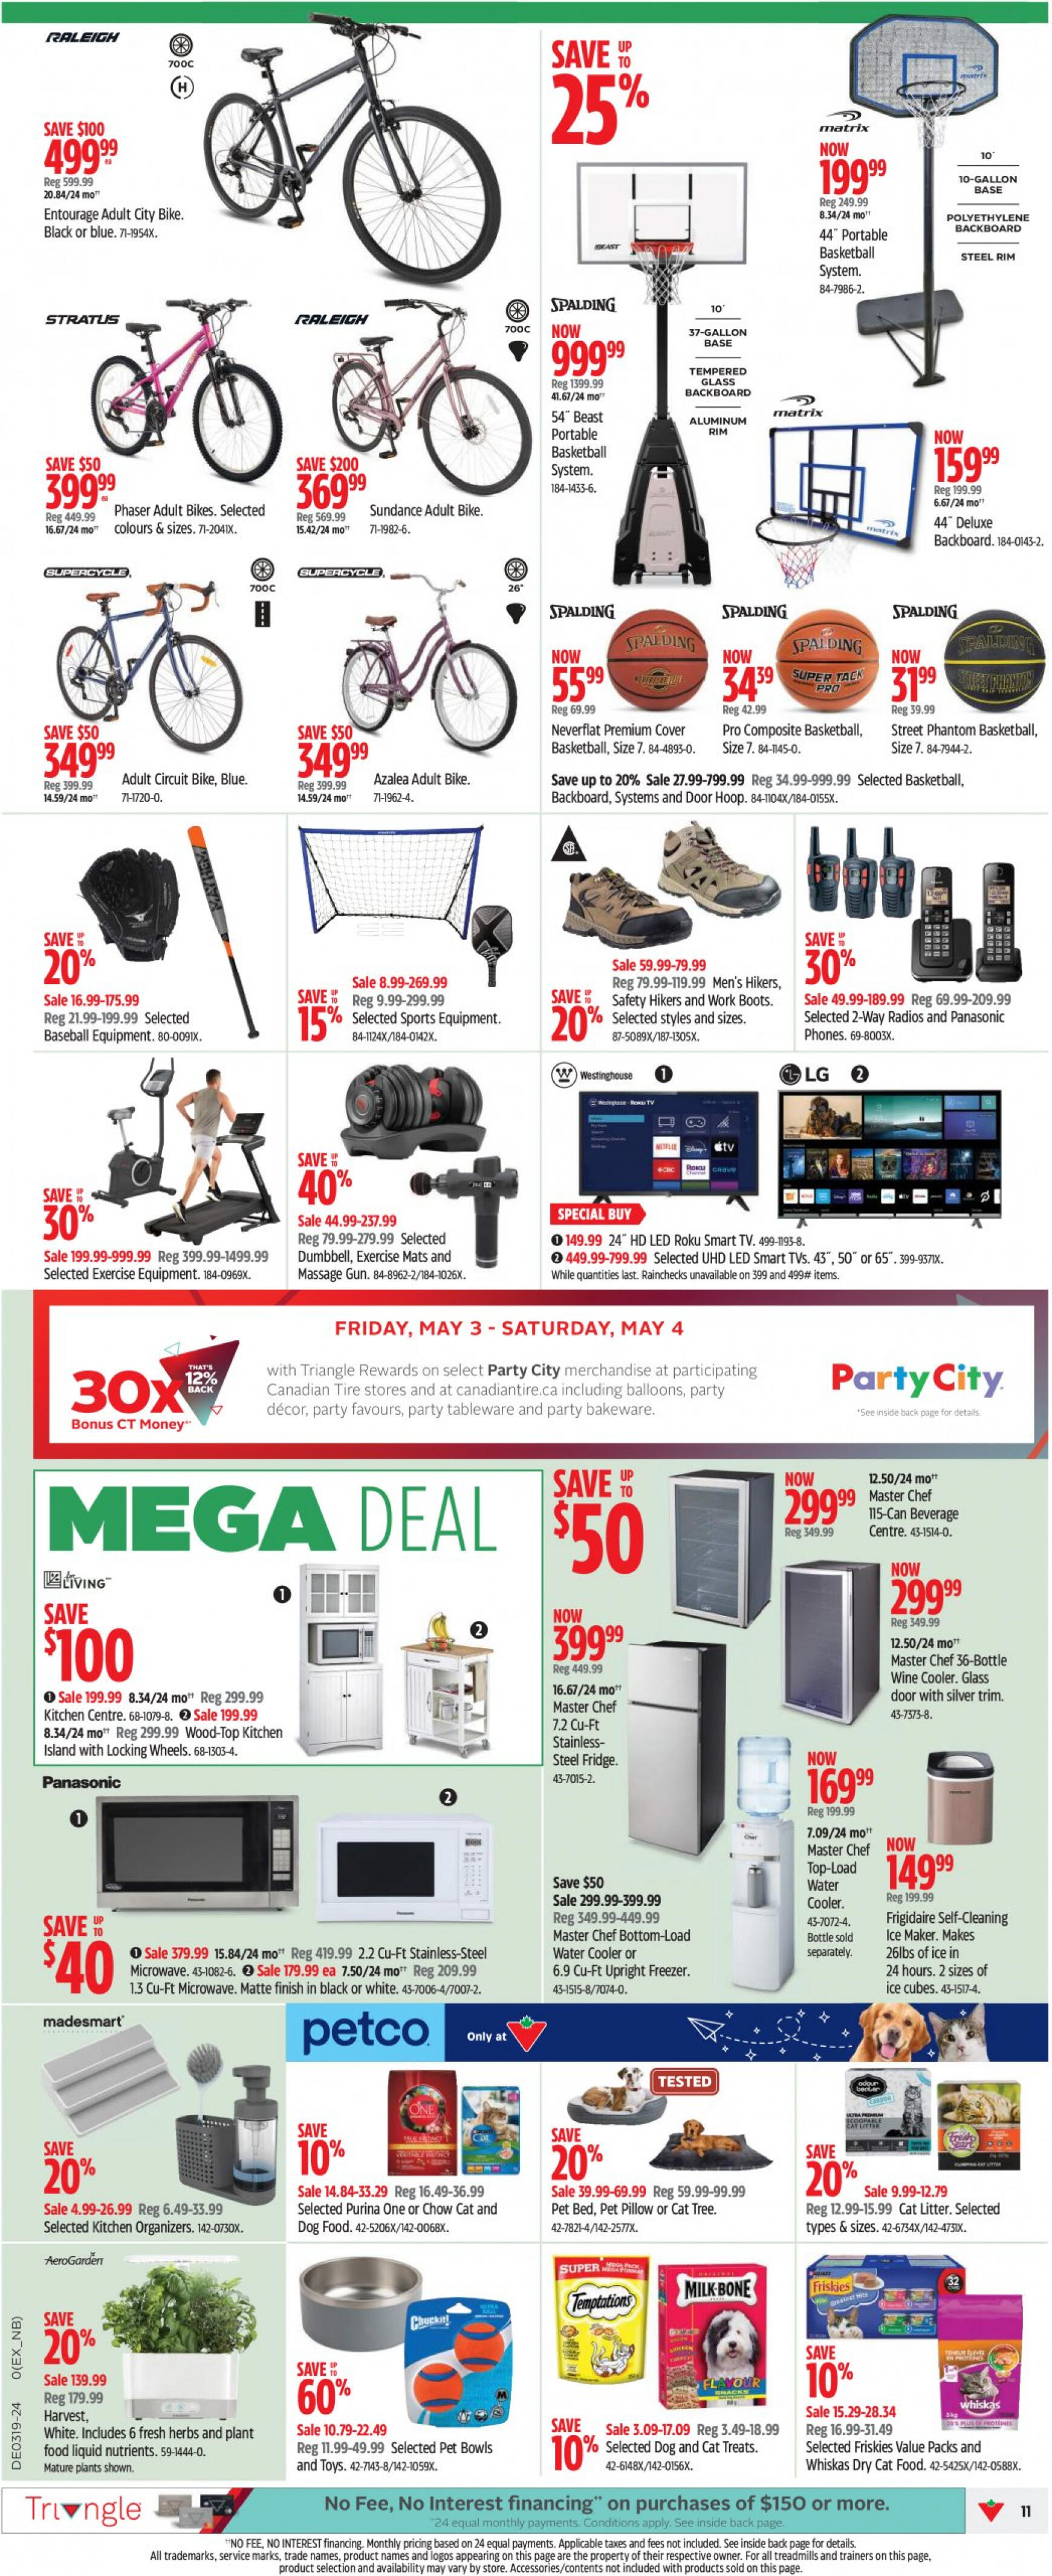 canadian-tire - Canadian Tire flyer current 02.05. - 08.05. - page: 10